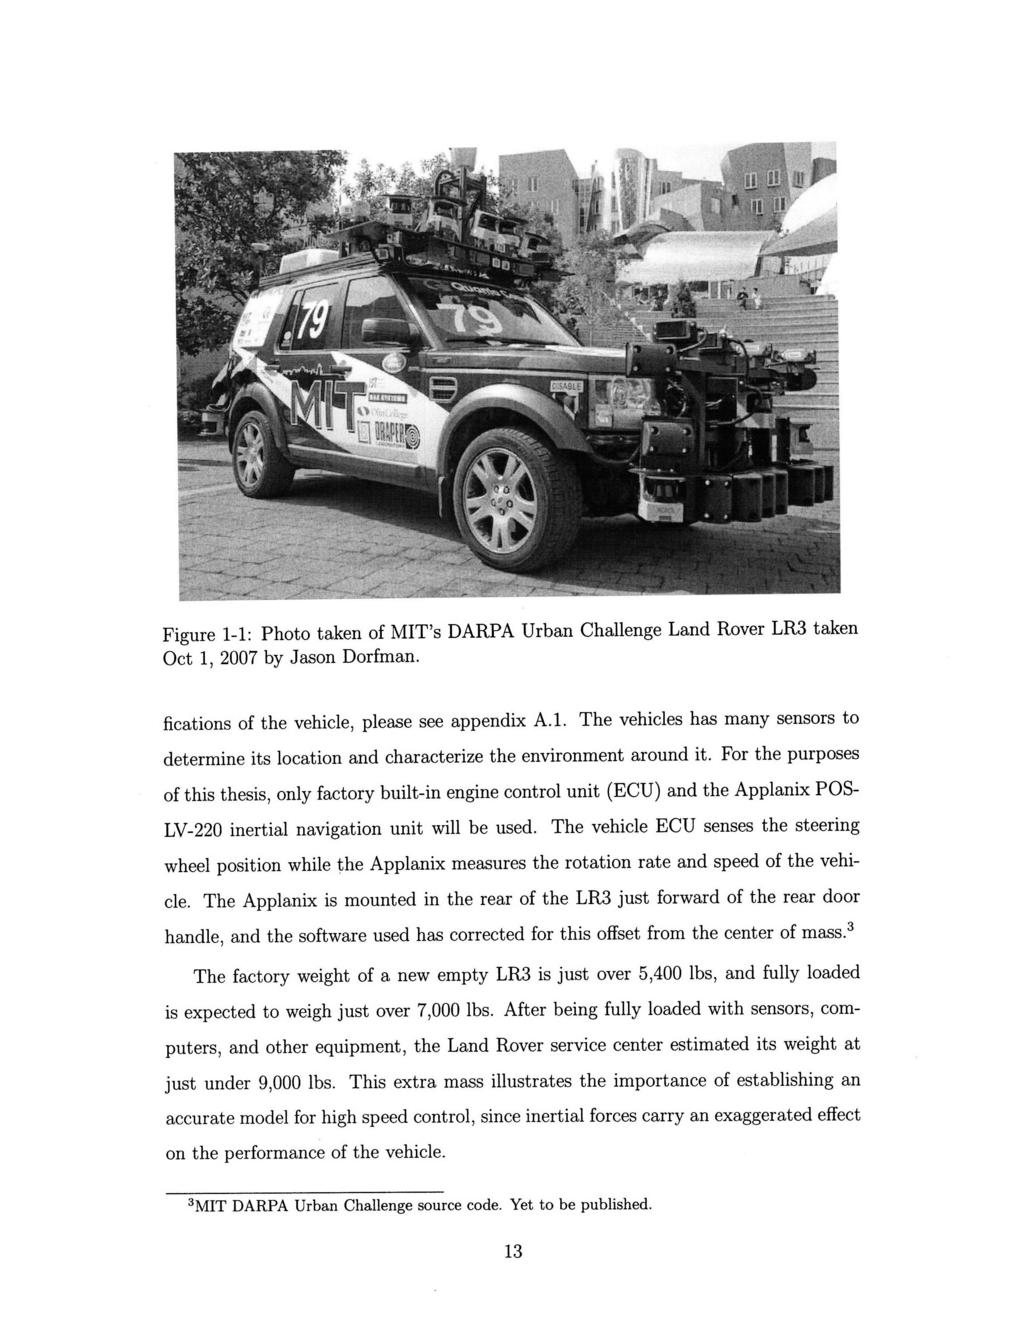 Figure 1-1: Photo taken of MIT's DARPA Urban Challenge Land Rover LR3 taken Oct 1, 2007 by Jason Dorfman. fications of the vehicle, please see appendix A.1. The vehicles has many sensors to determine its location and characterize the environment around it.